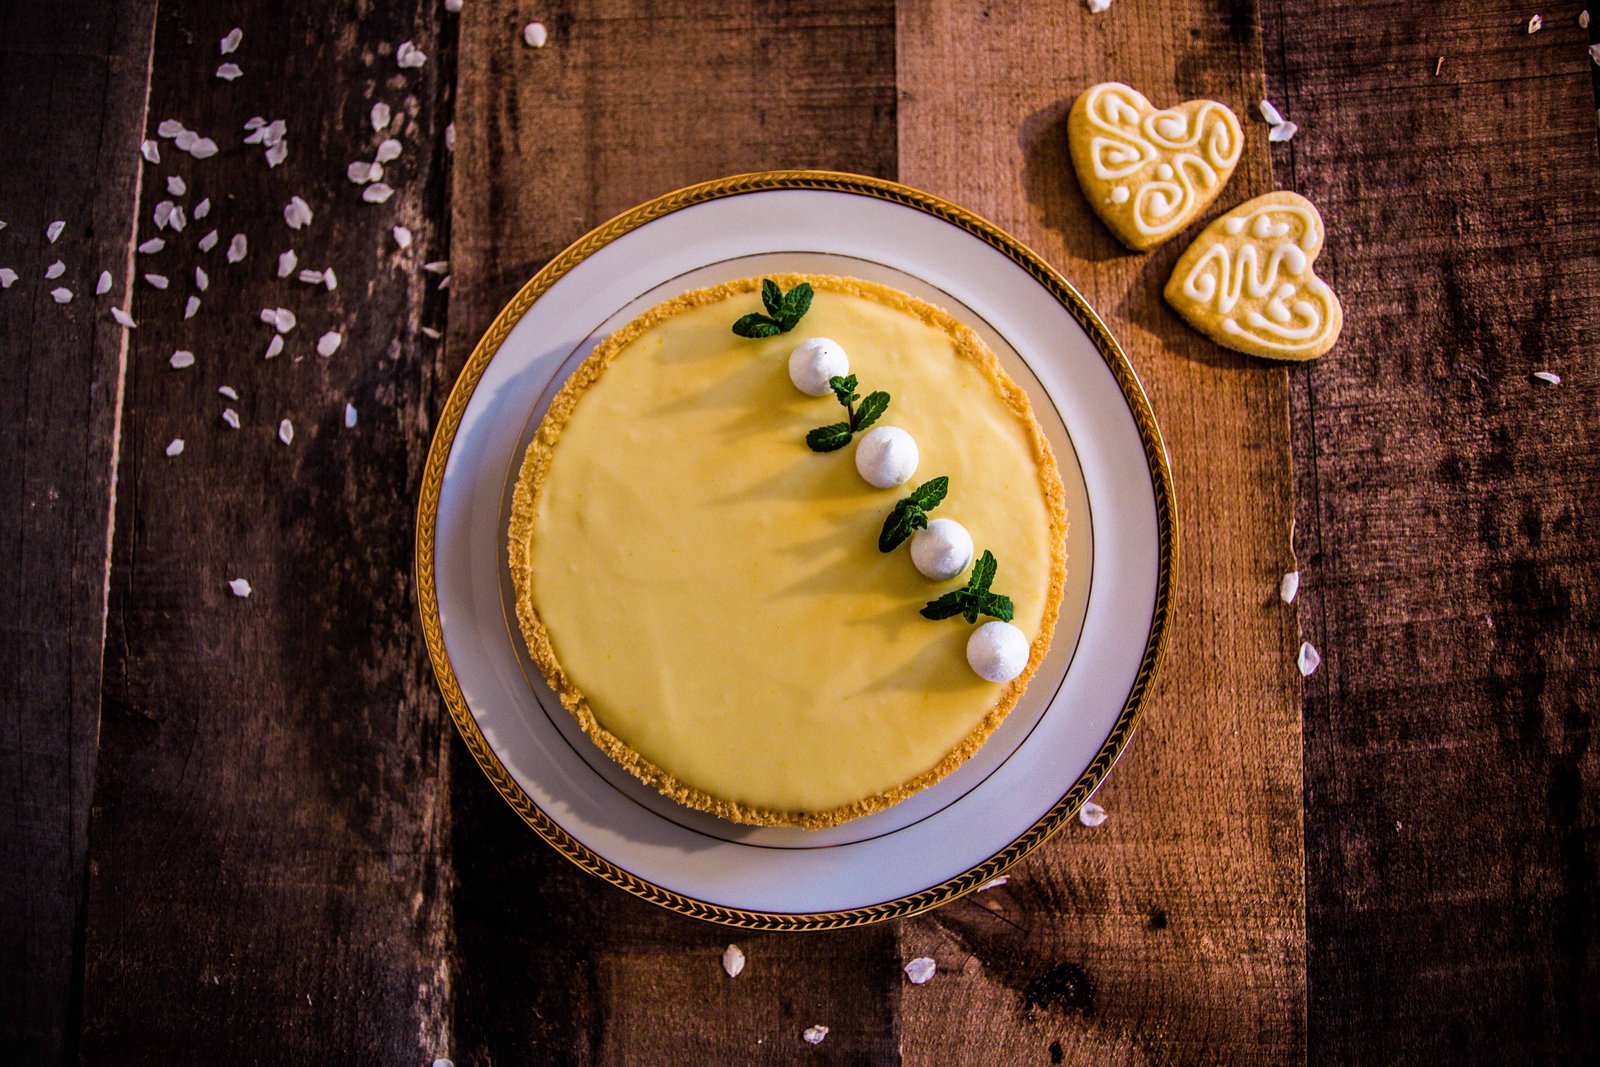 Tarte lime and basil by Jaques Génin